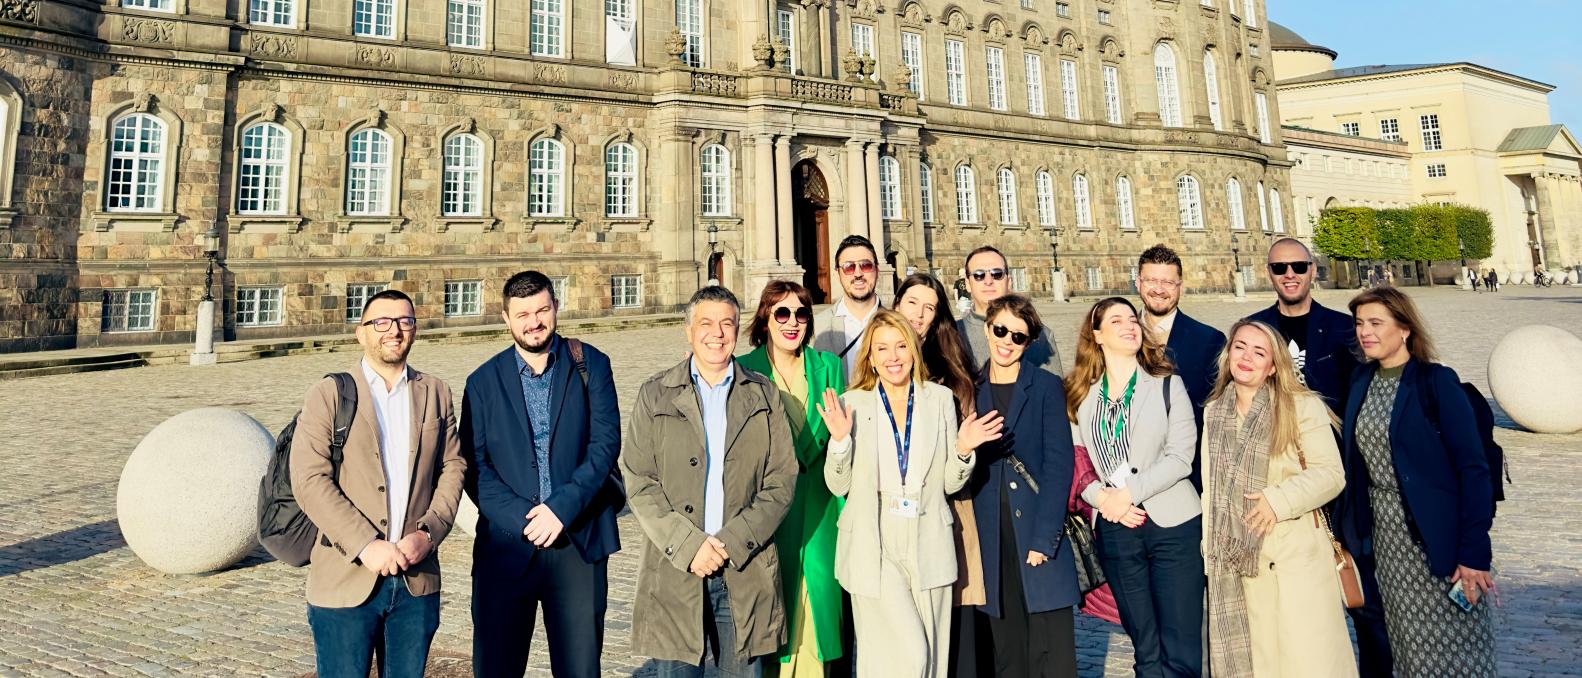 1.	Whole group in front of Borgen 